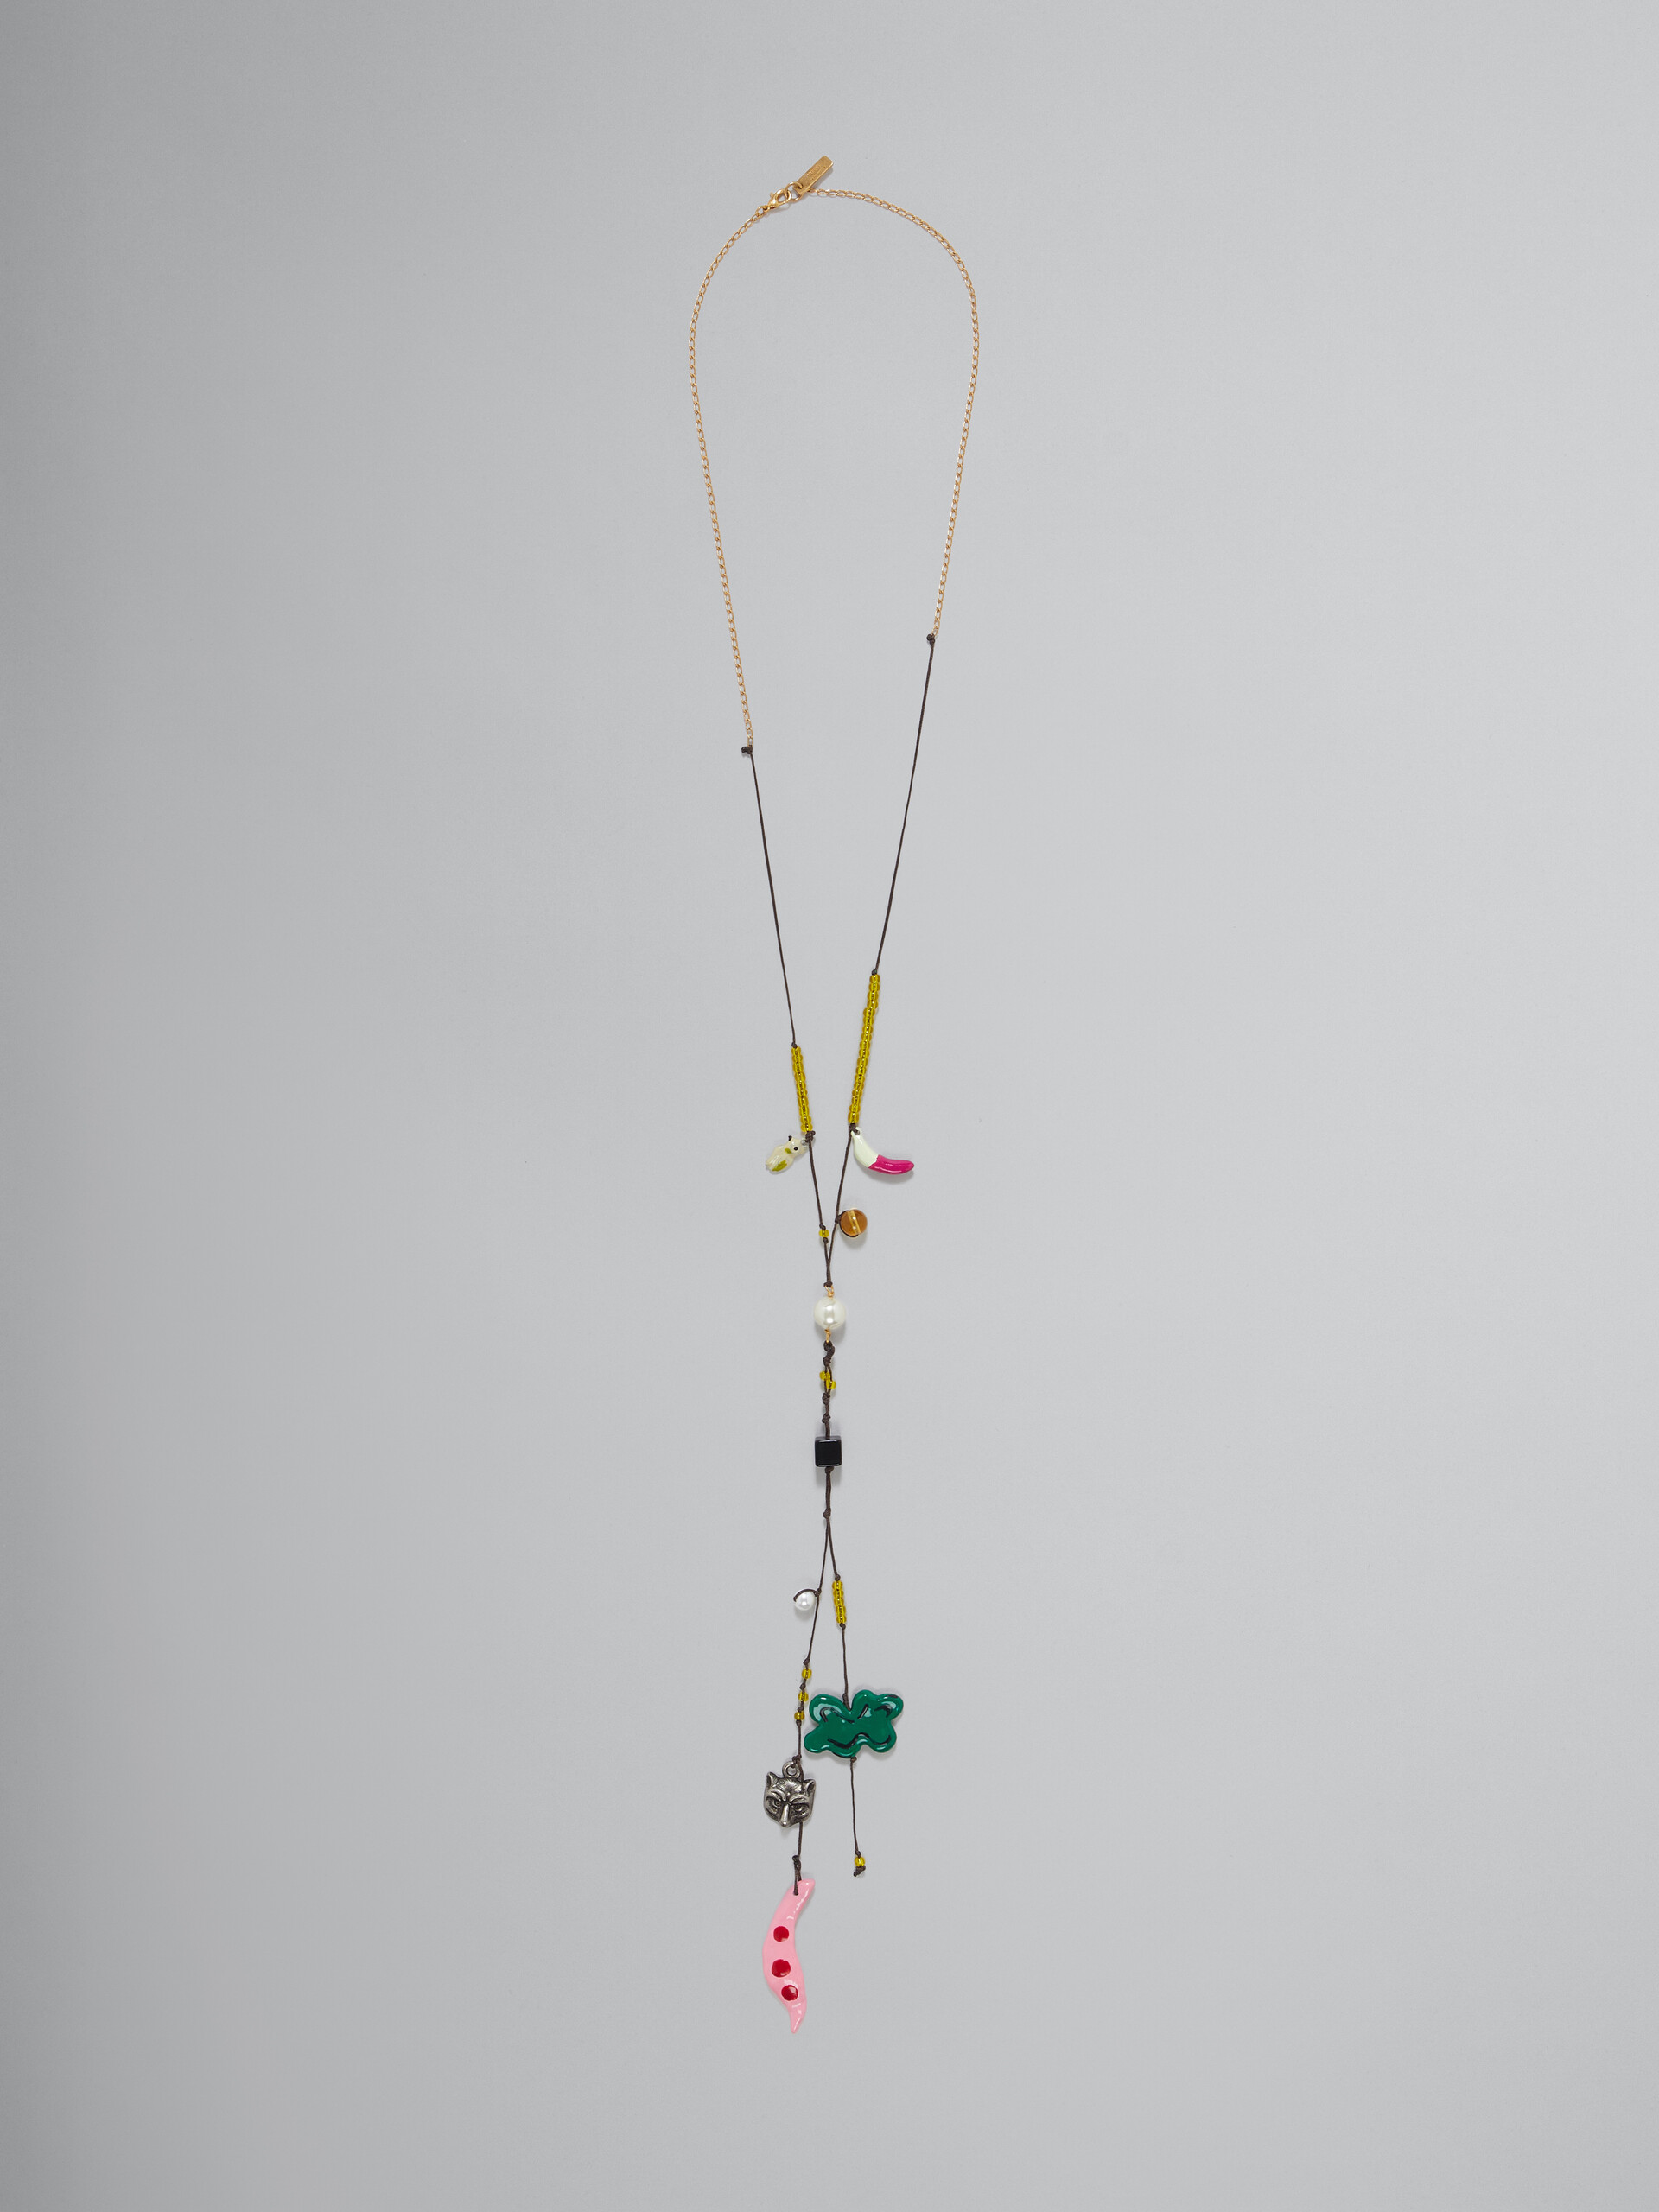 Marni x No Vacancy Inn - Long necklace with green pink and yellow pendants - Necklaces - Image 1